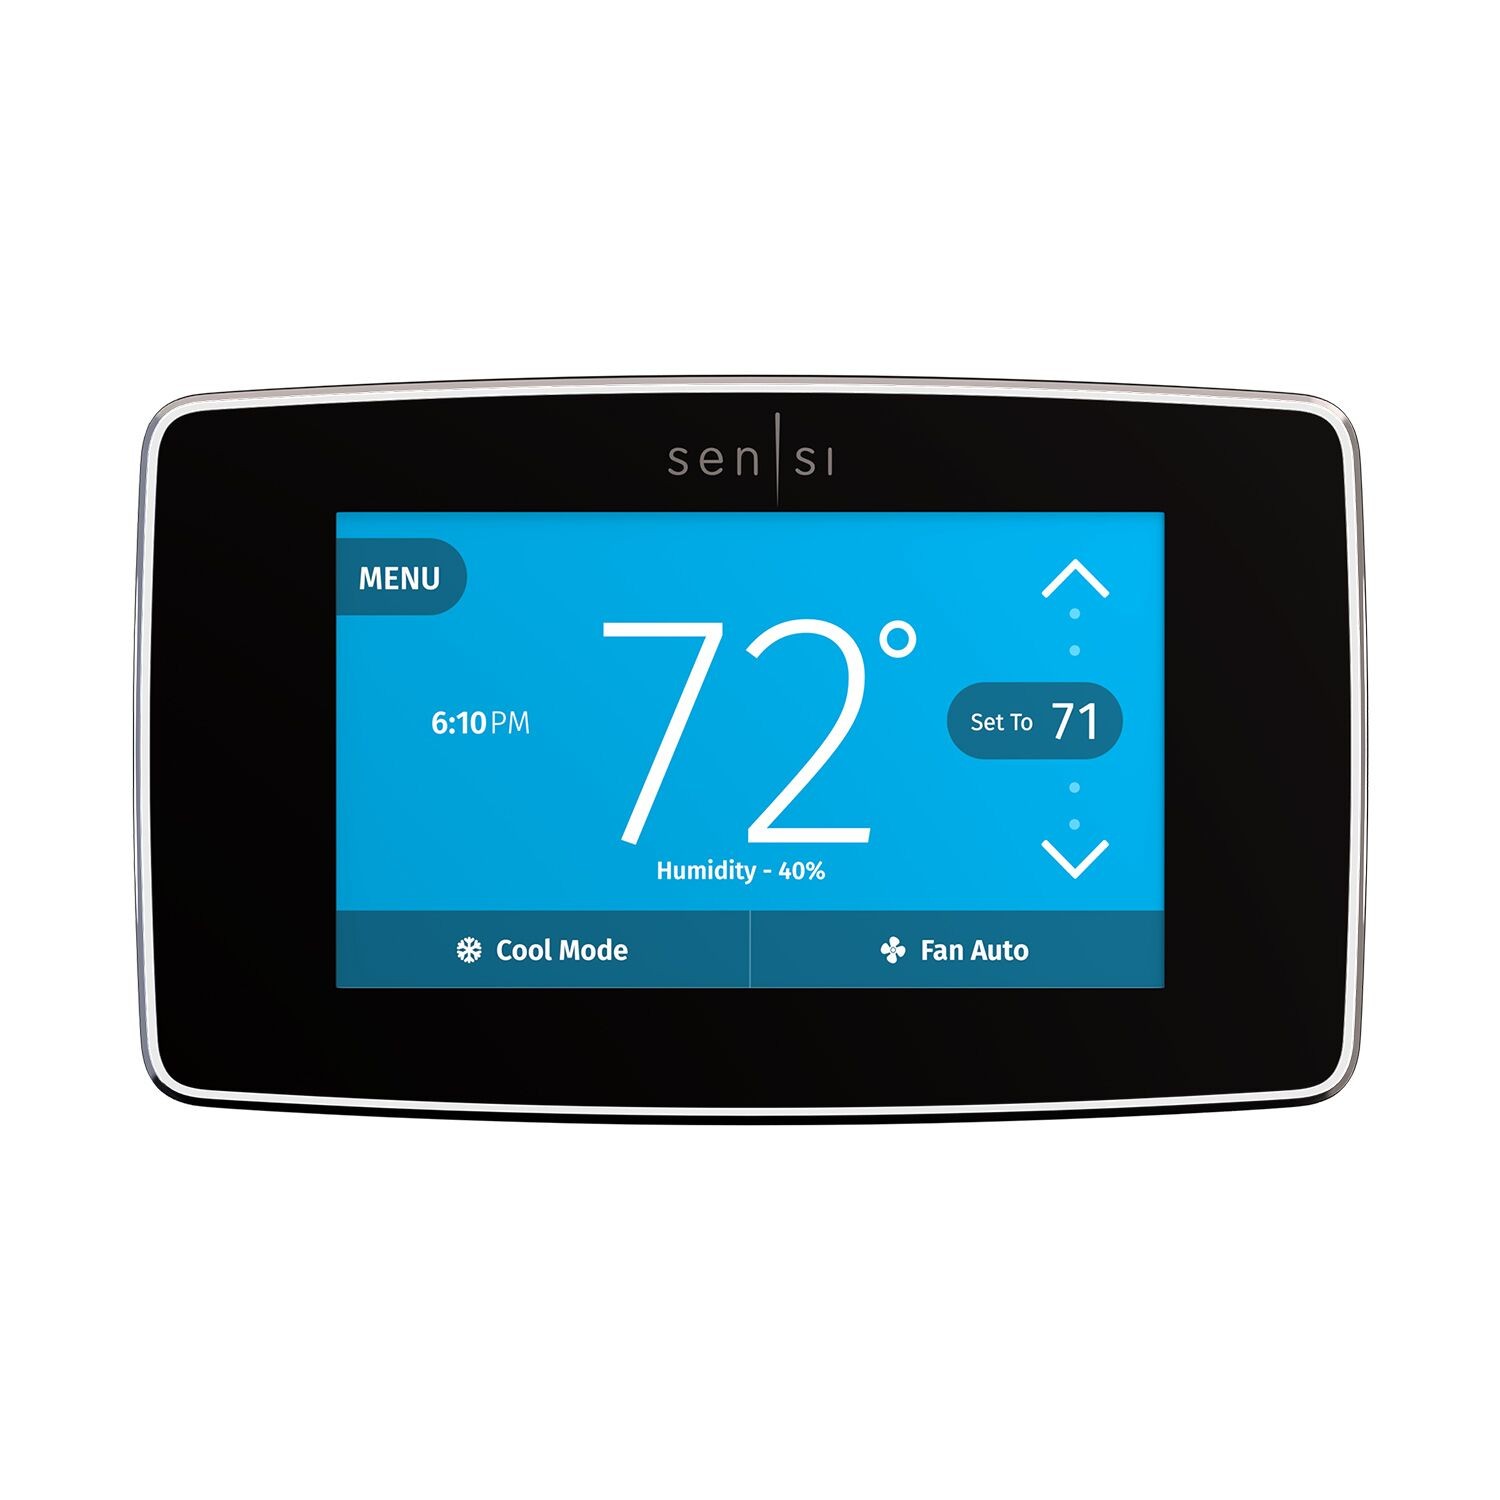 Emerson Sensi Touch Smart Thermostat ST75 $25 Eversource CT YMMV